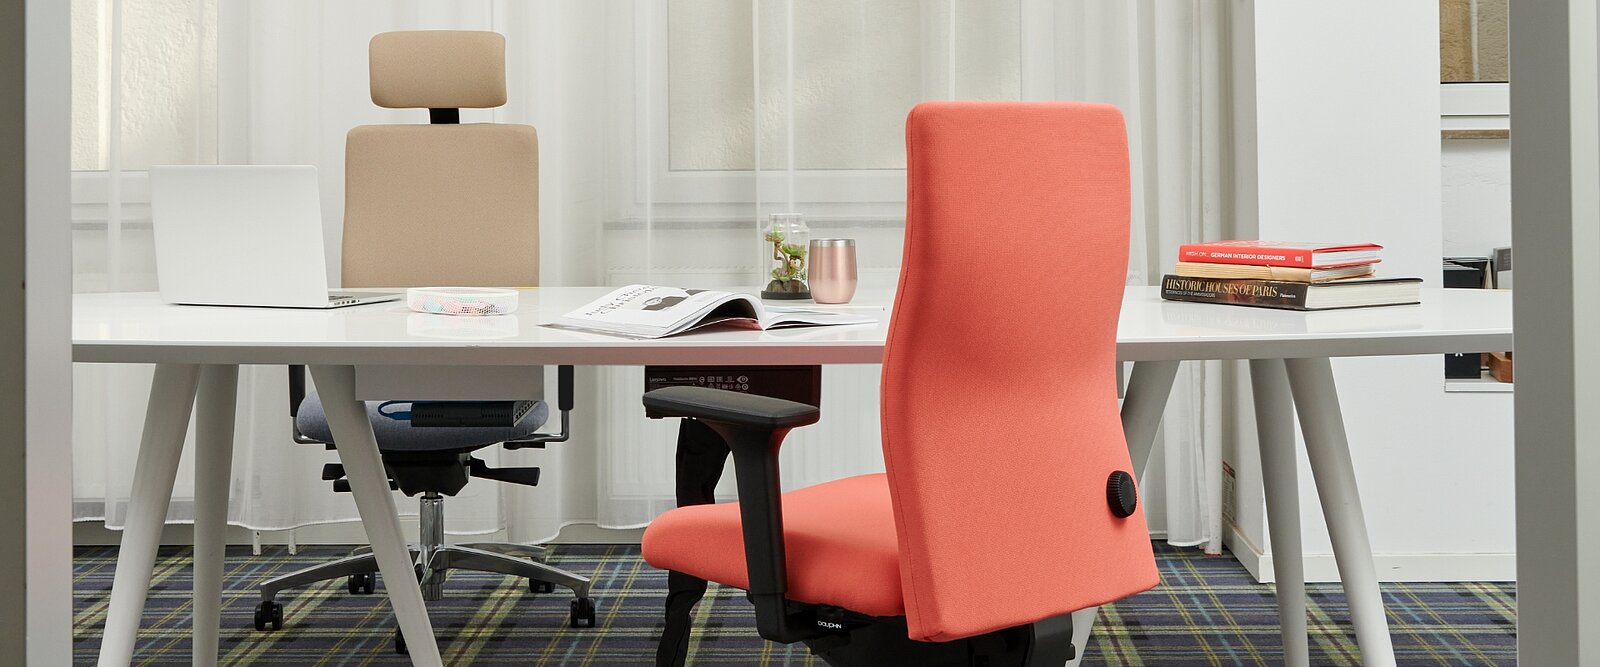 The Shape economy2 comfort swivel chairs with a fully upholstered backrest have an anatomical backrest contour to provide optimum support when working.